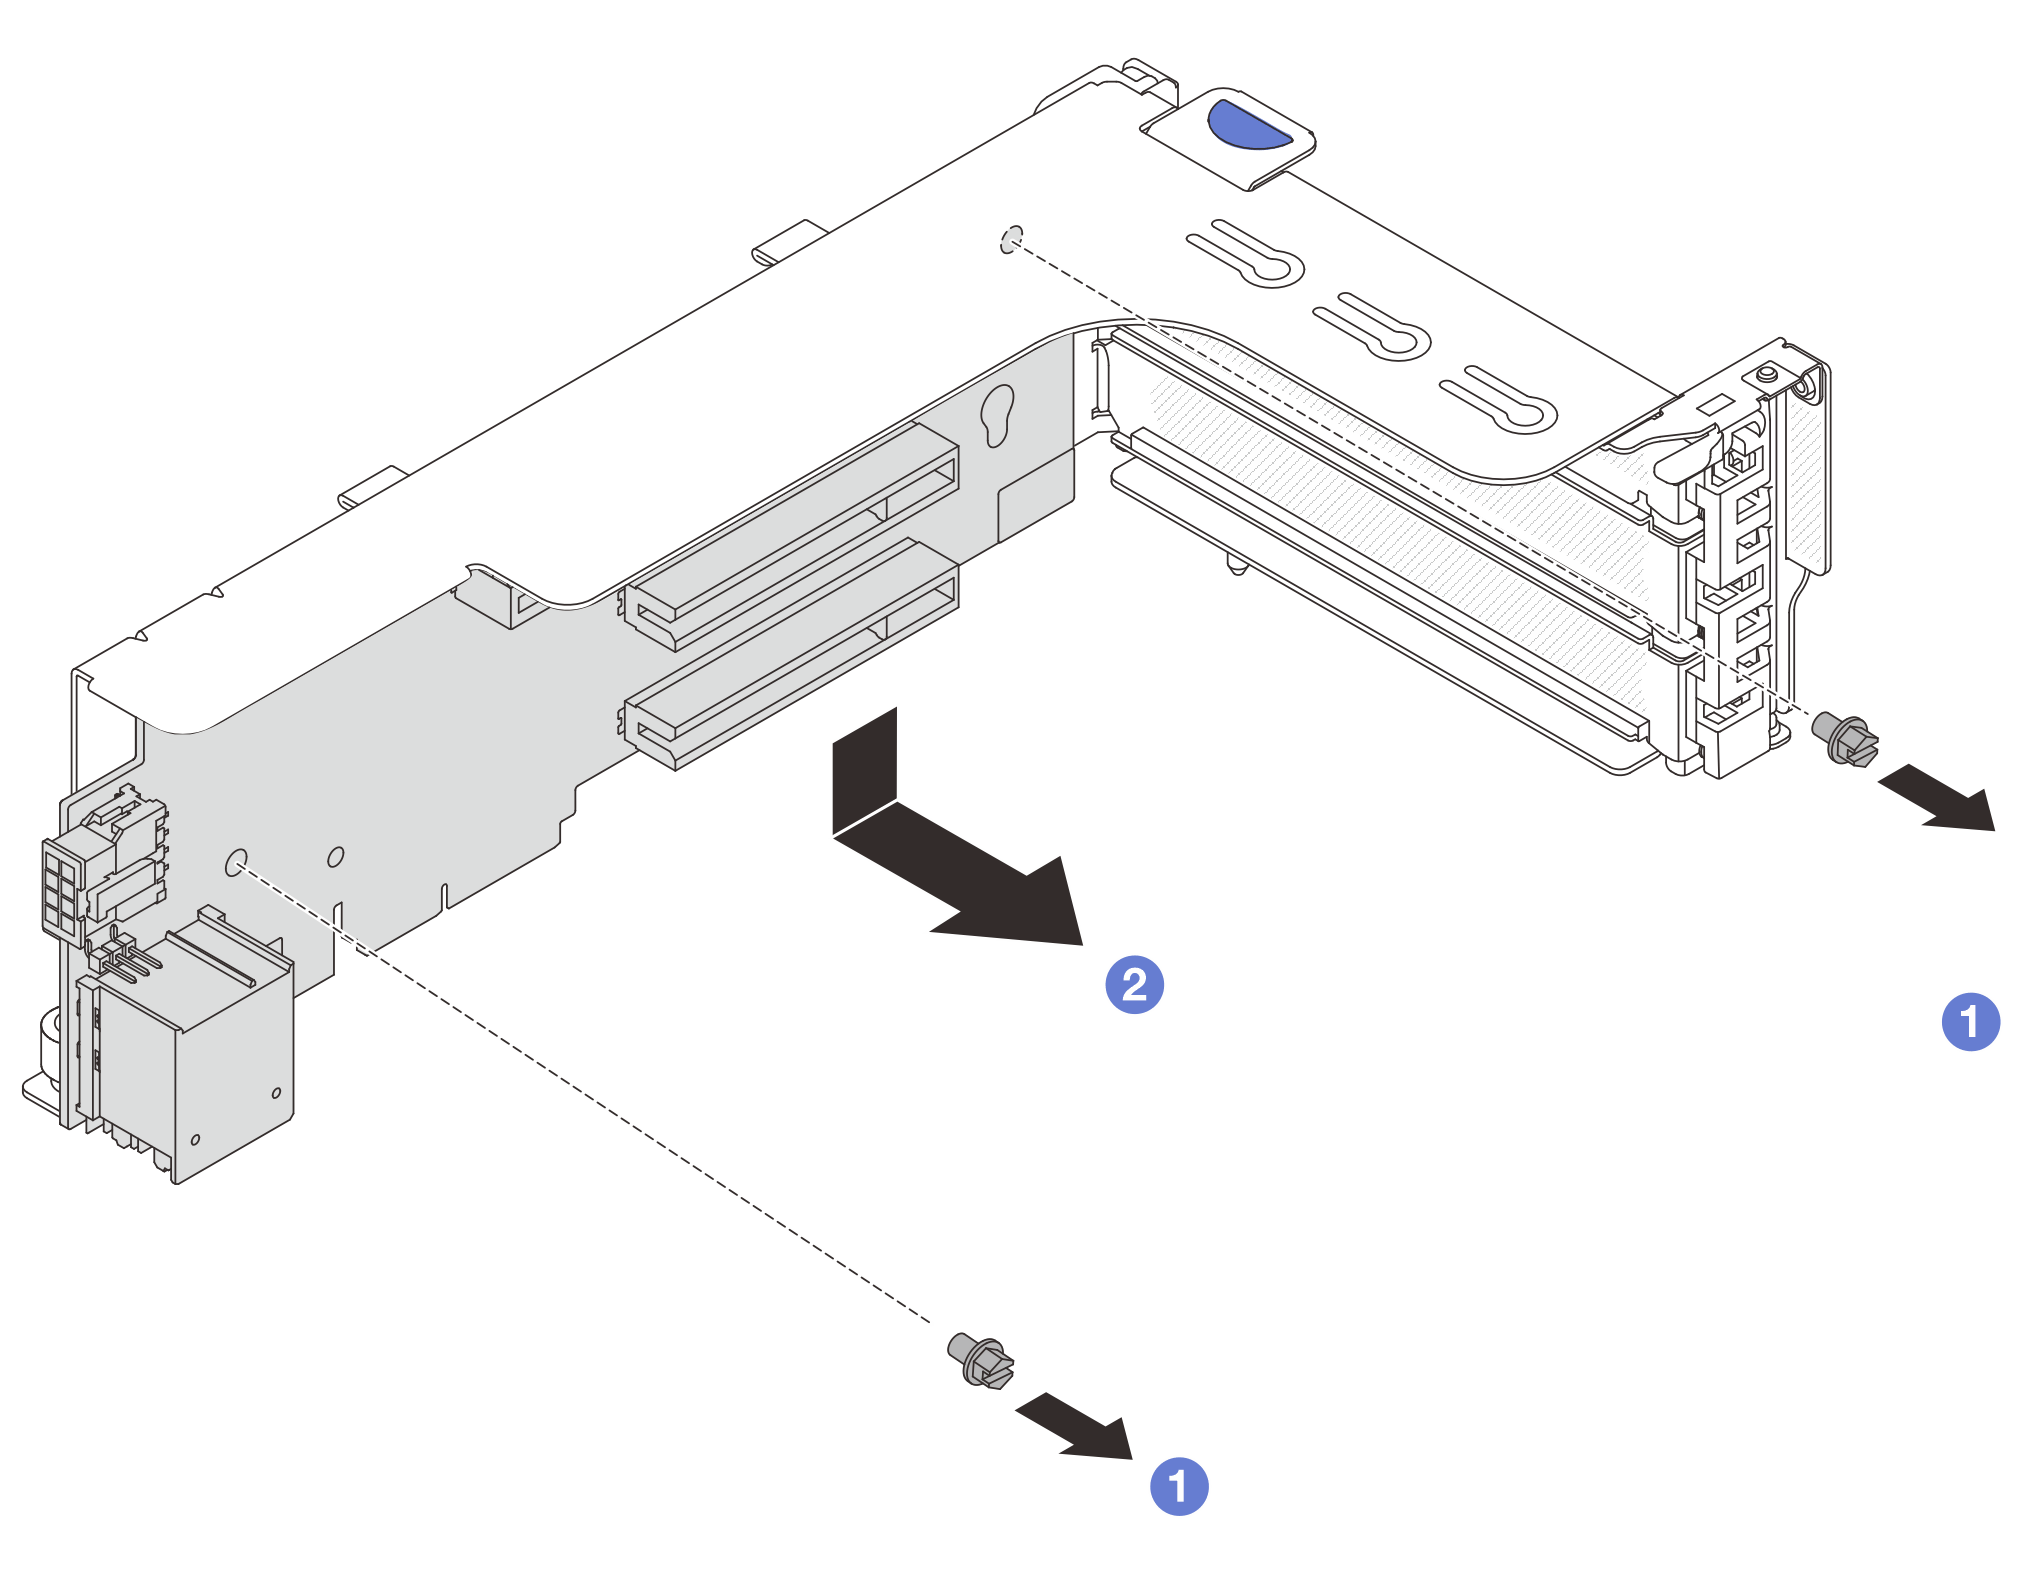 Removing the riser card from riser 1 cage or riser 2 cage